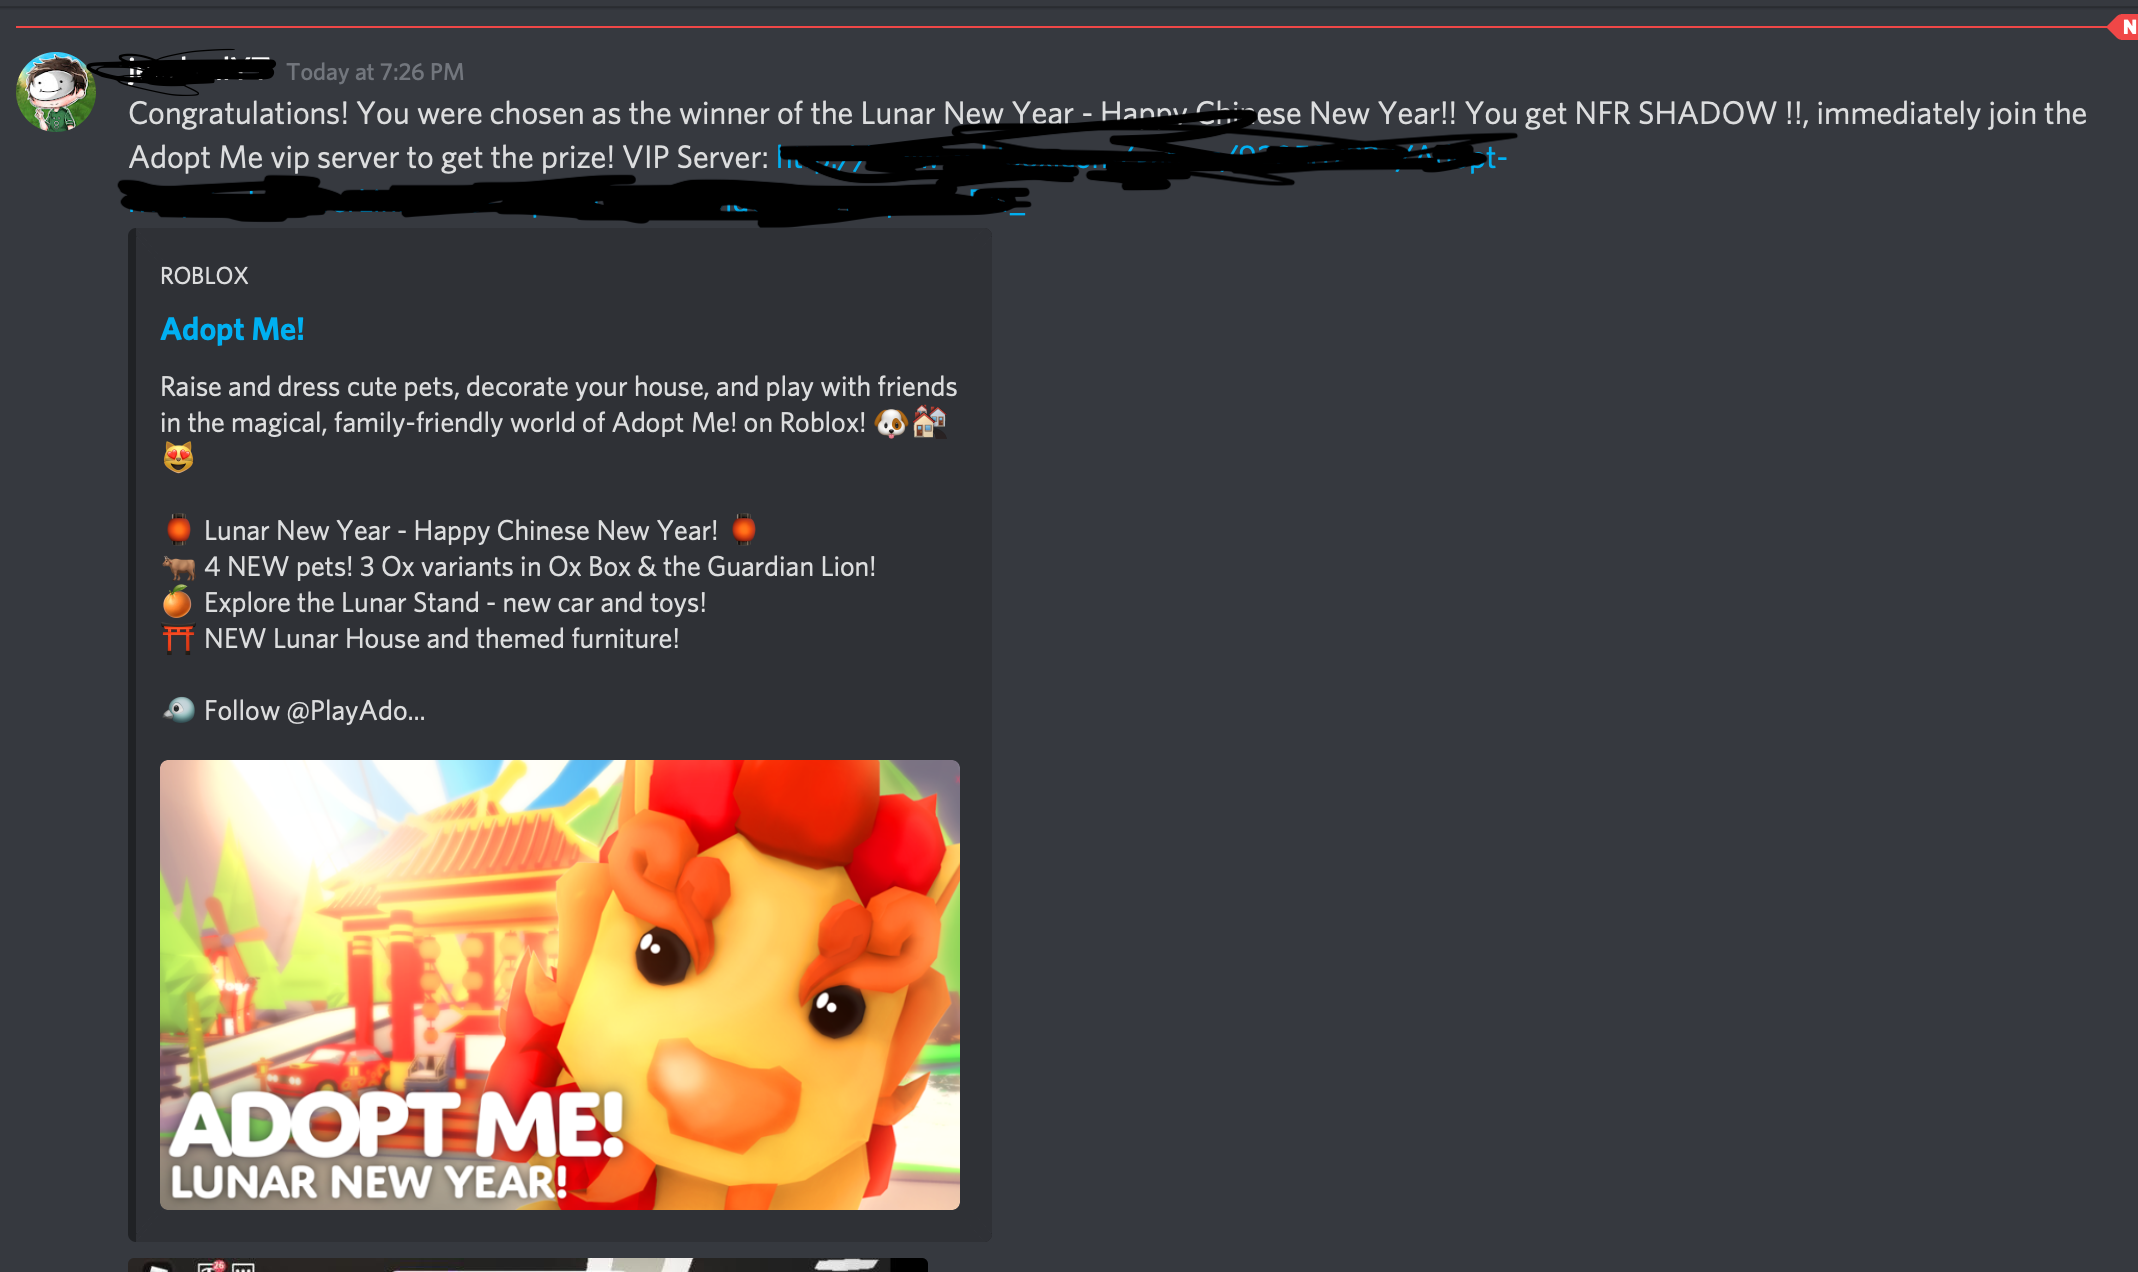 make you a roblox related discord server